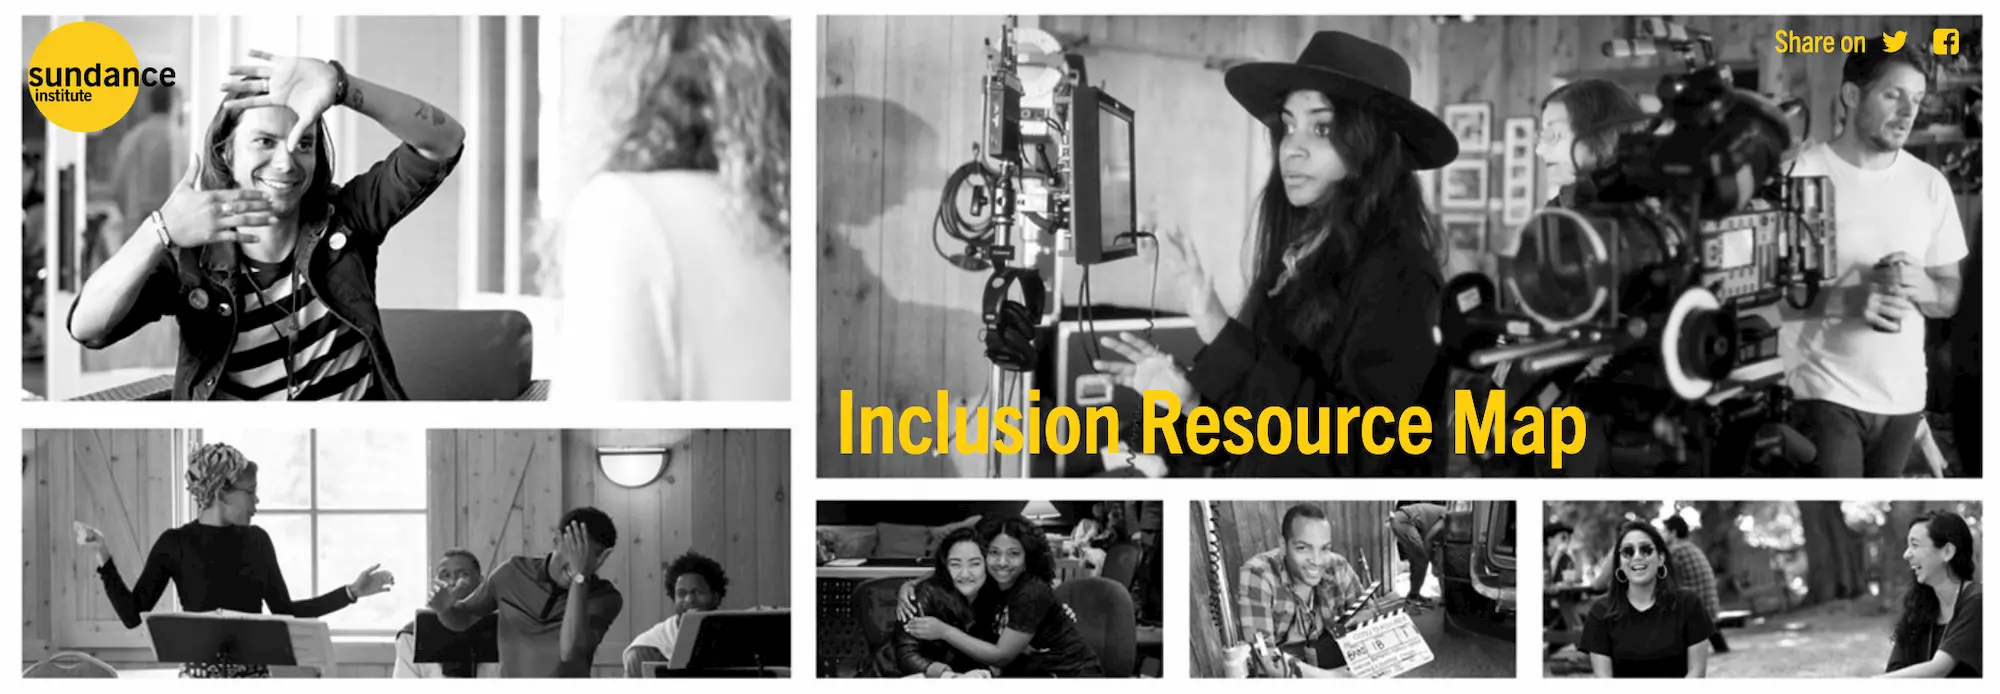 sundance diversity outreach and inclusion resource map logo